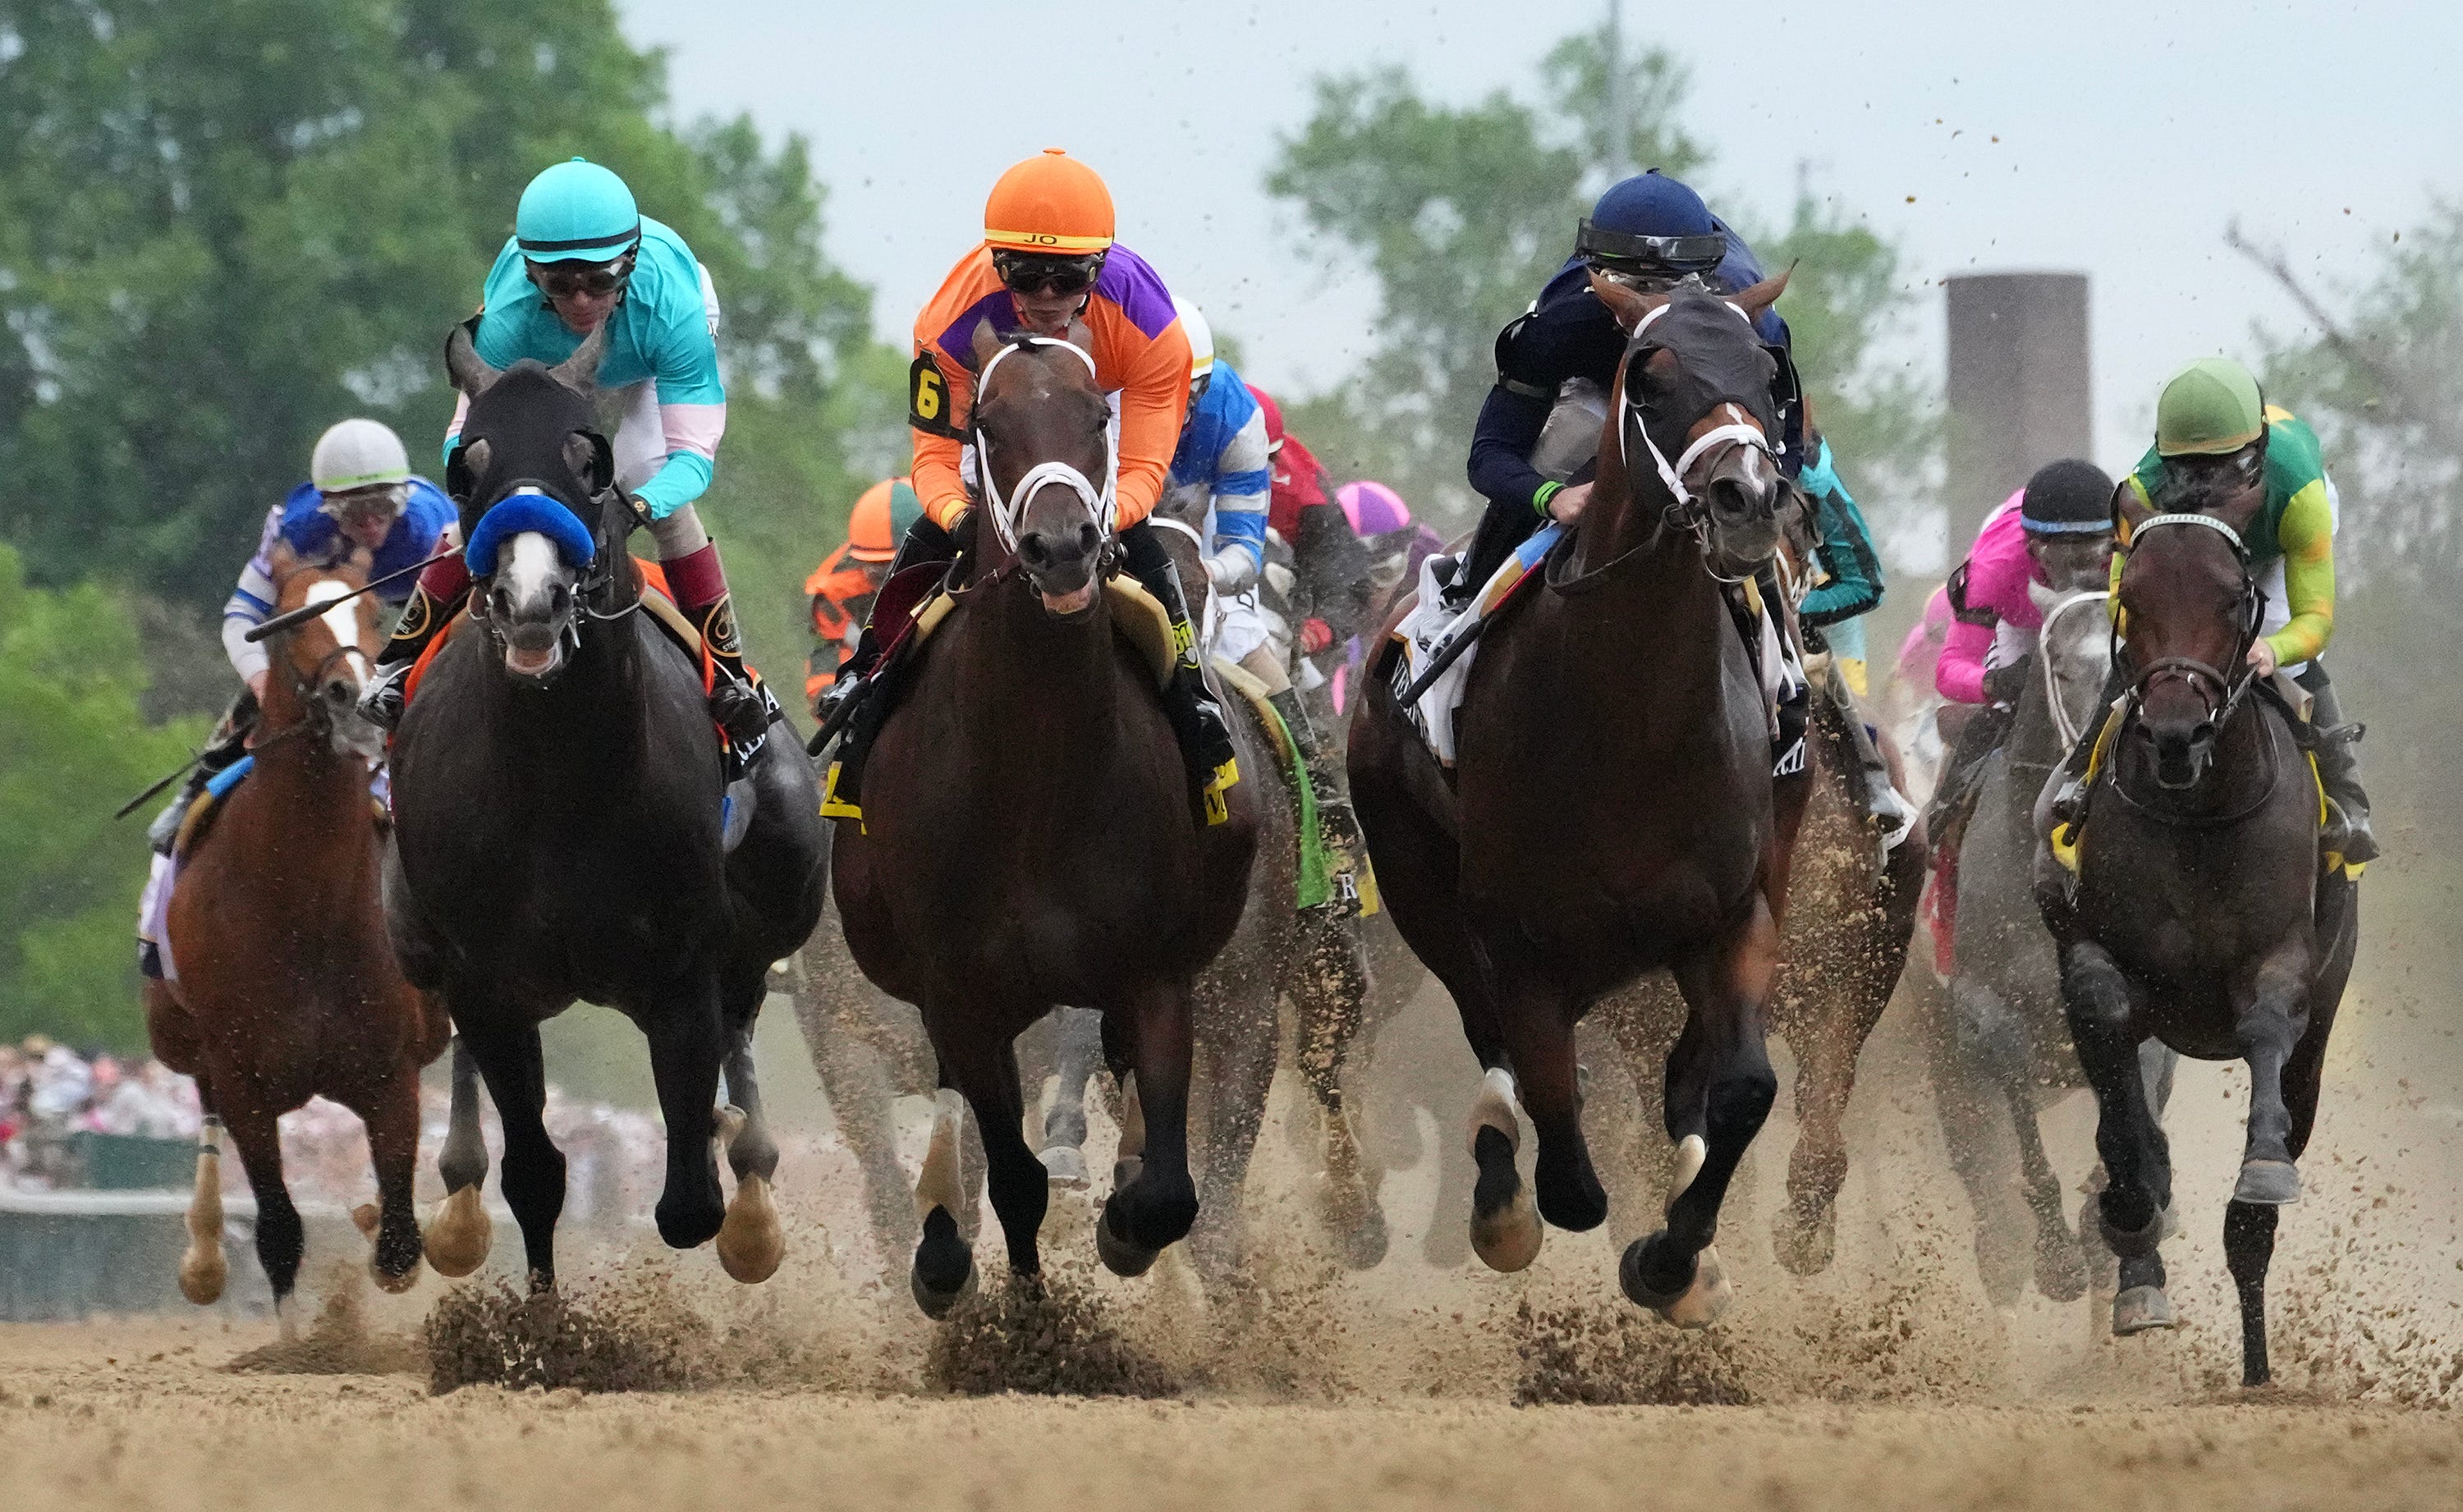 Have a MyDerbyMemory? Here's how to win a trip to the 150th Kentucky Derby